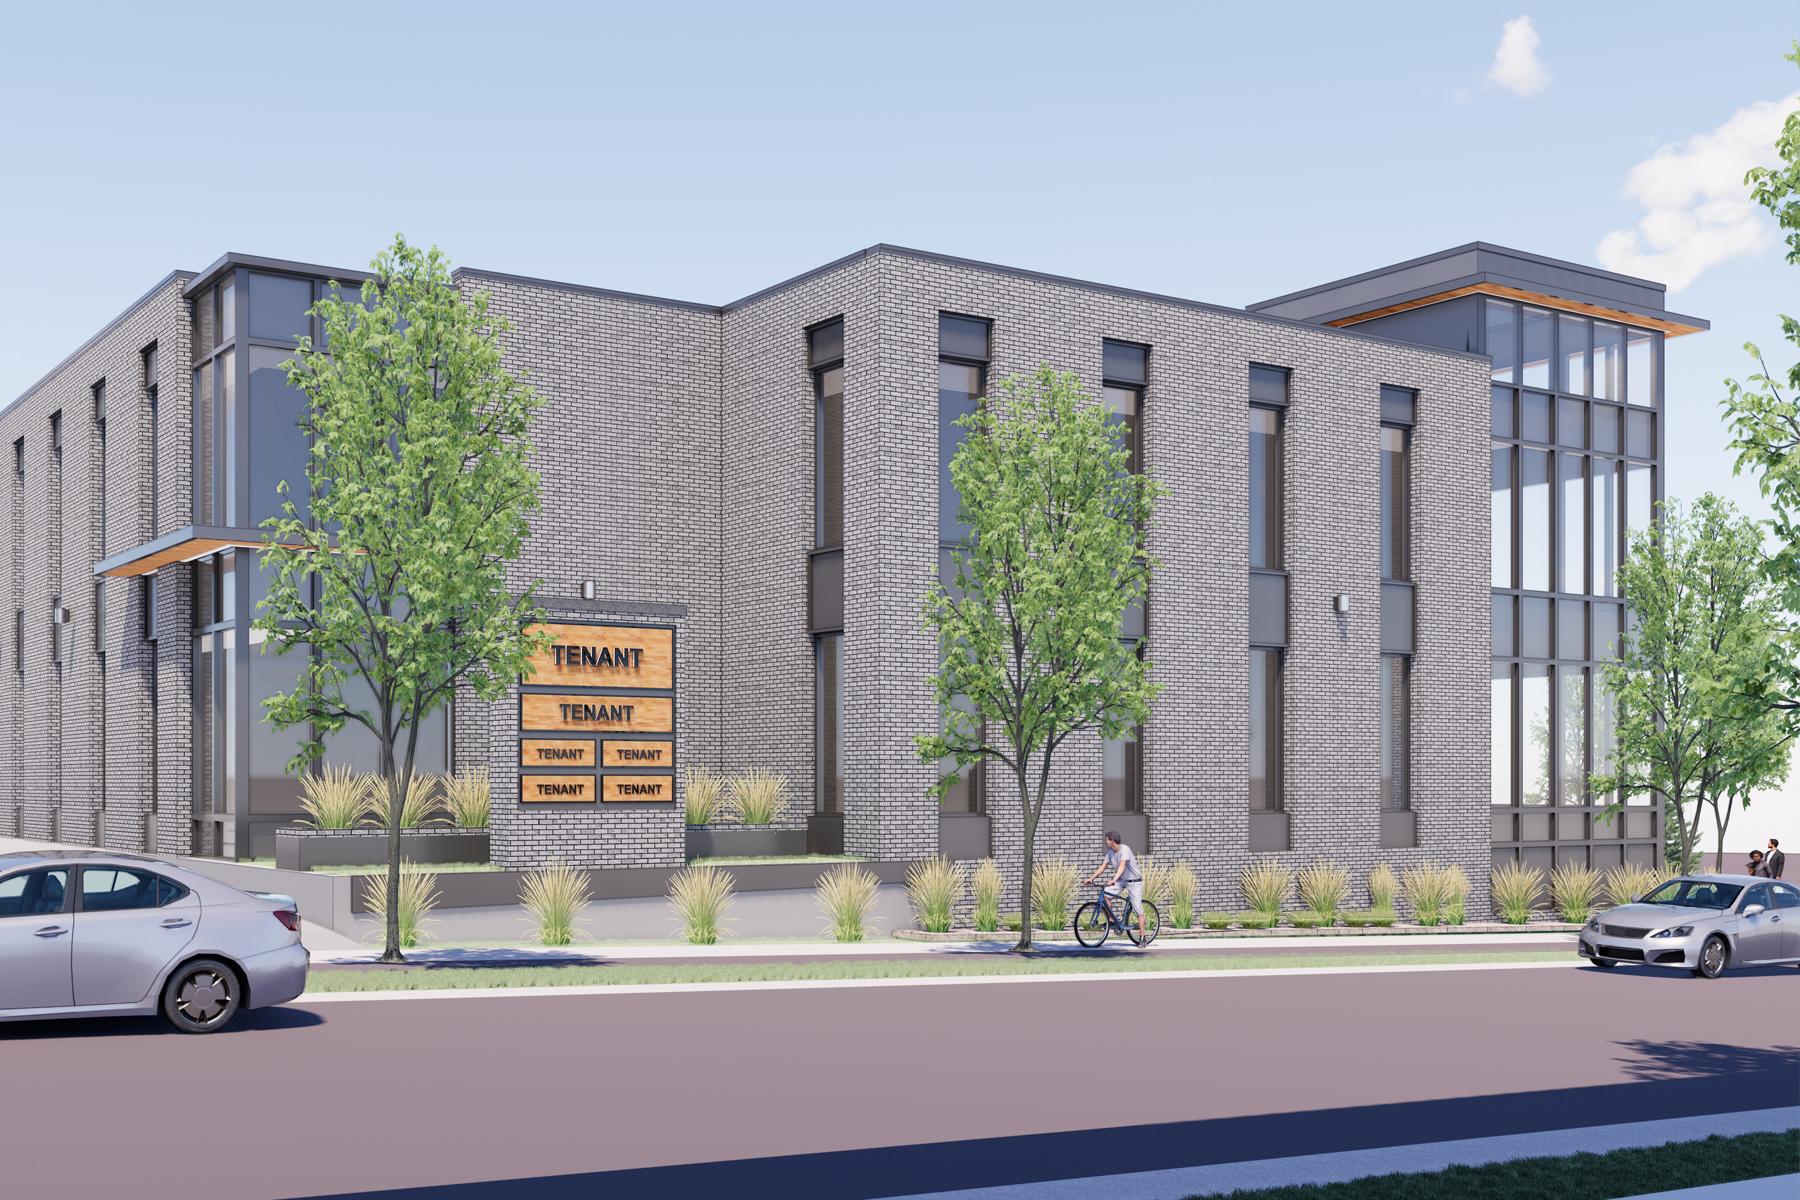 Two new tenants have been named for Highland Bridge Medical Office. This rendering shows the Southeast corner view of the building.